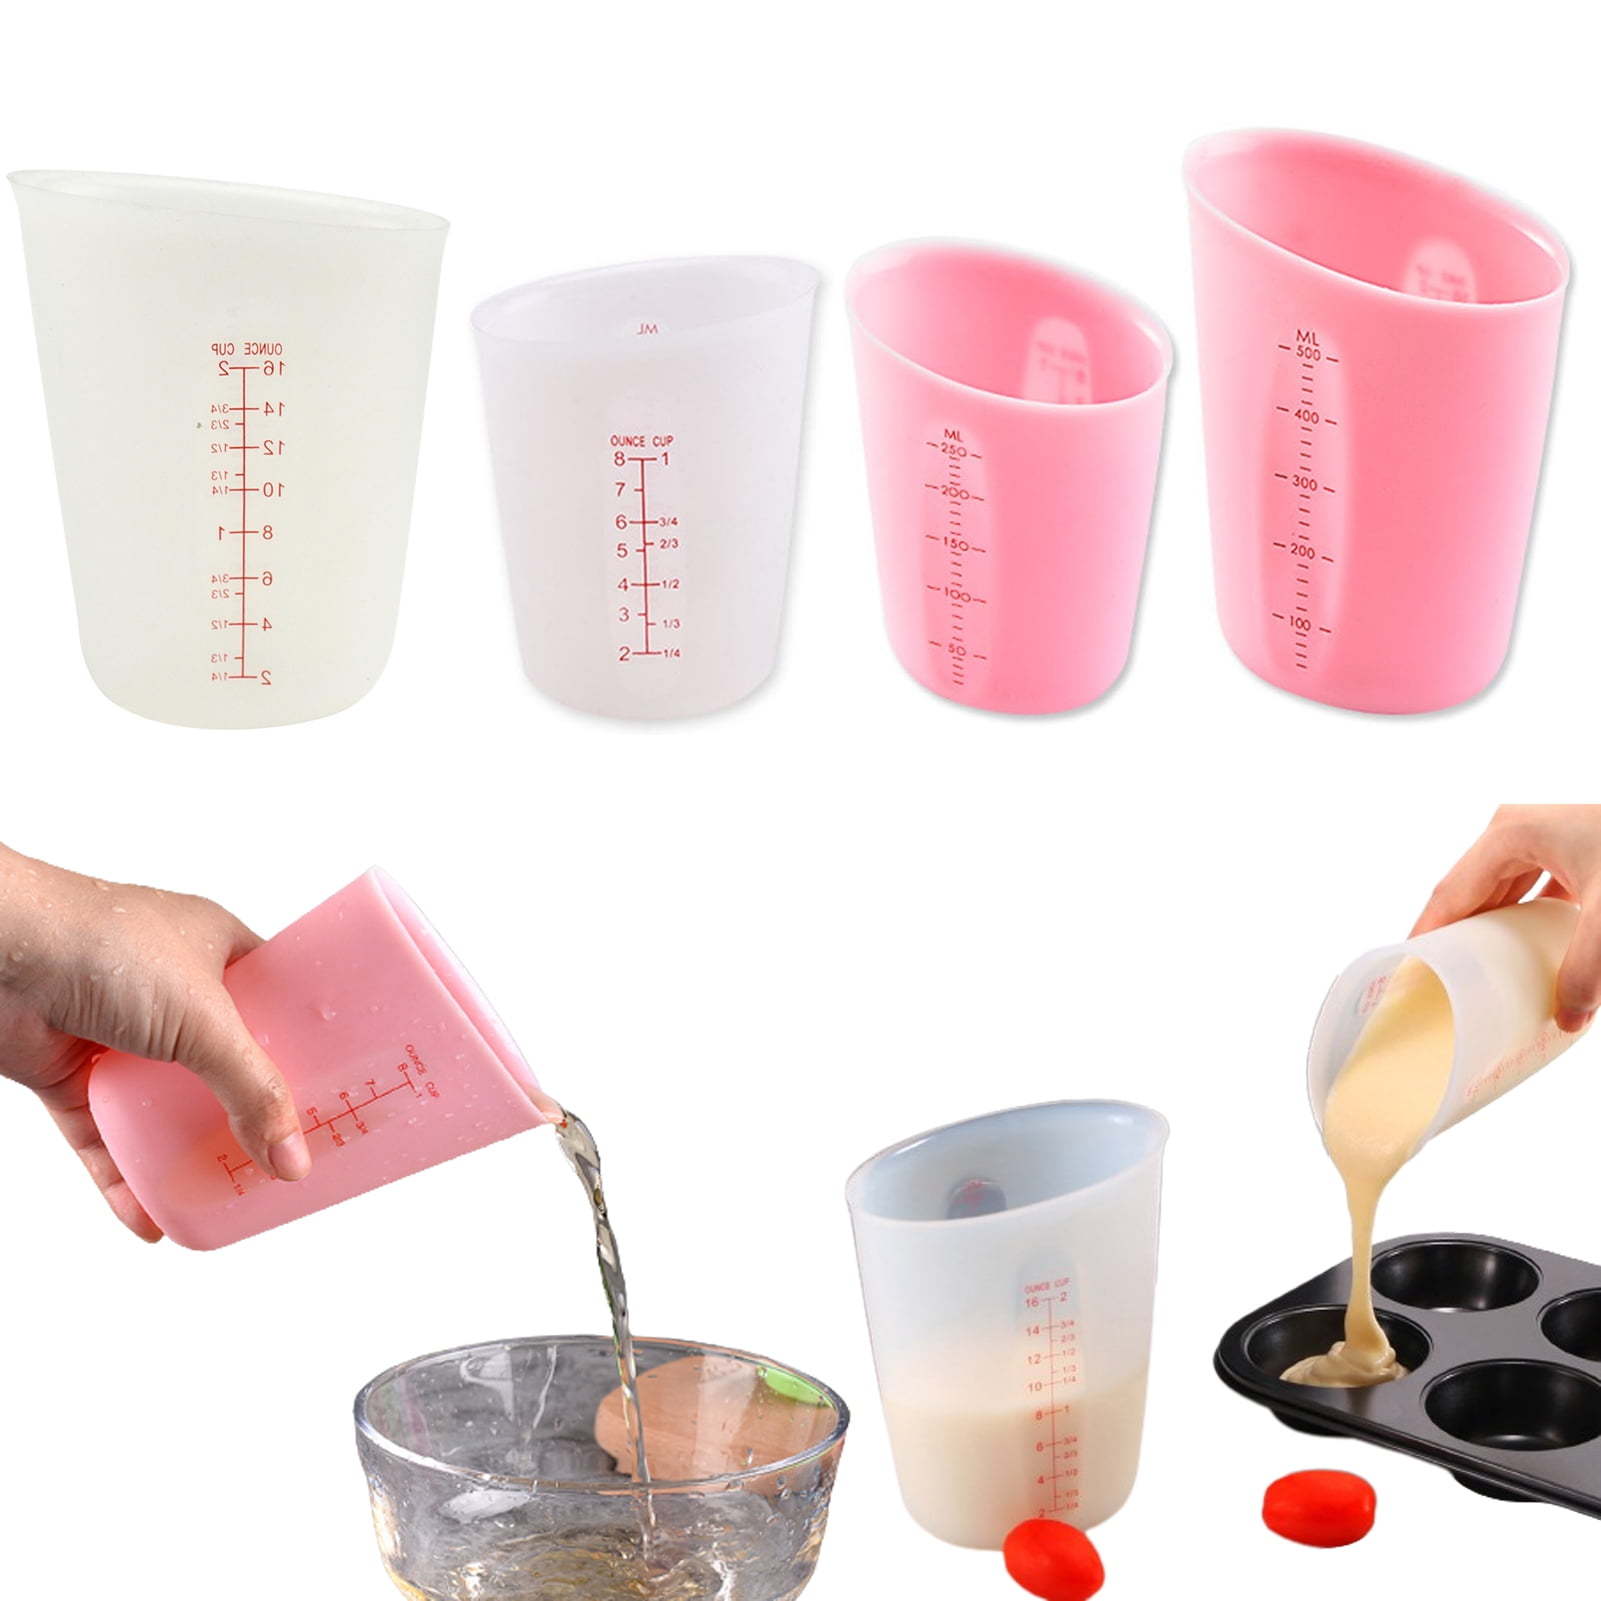 Silicone Flexible Measuring Cups Set for Epoxy Resin, Butter, Chocolate &  More - 2 Cup Melt Stir Squeeze & Pour - Dishwasher Safe - Standard & Metric